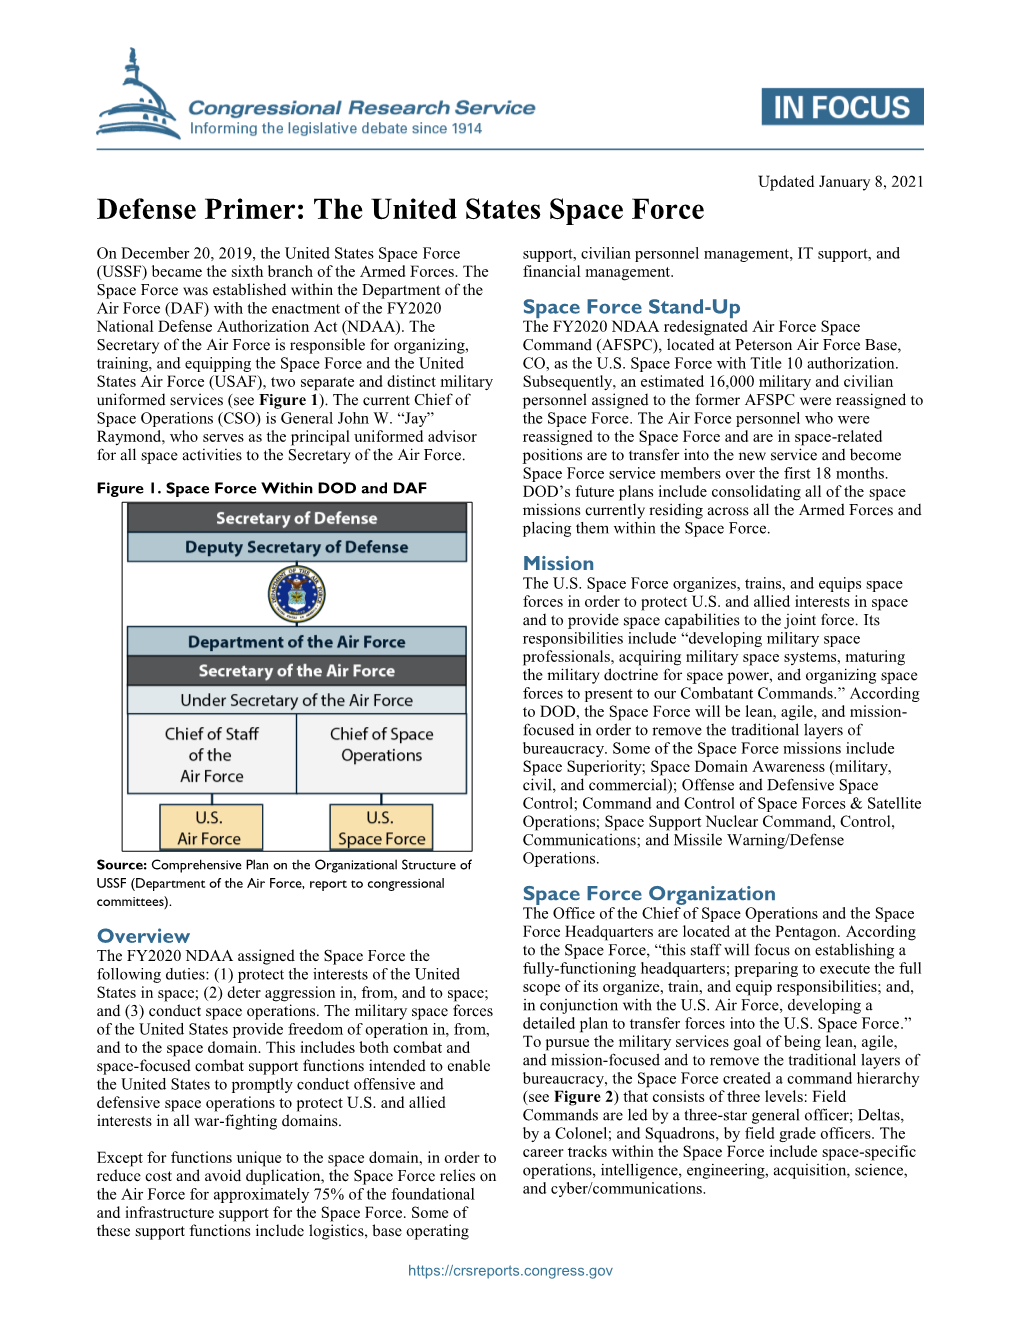 Defense Primer: the United States Space Force